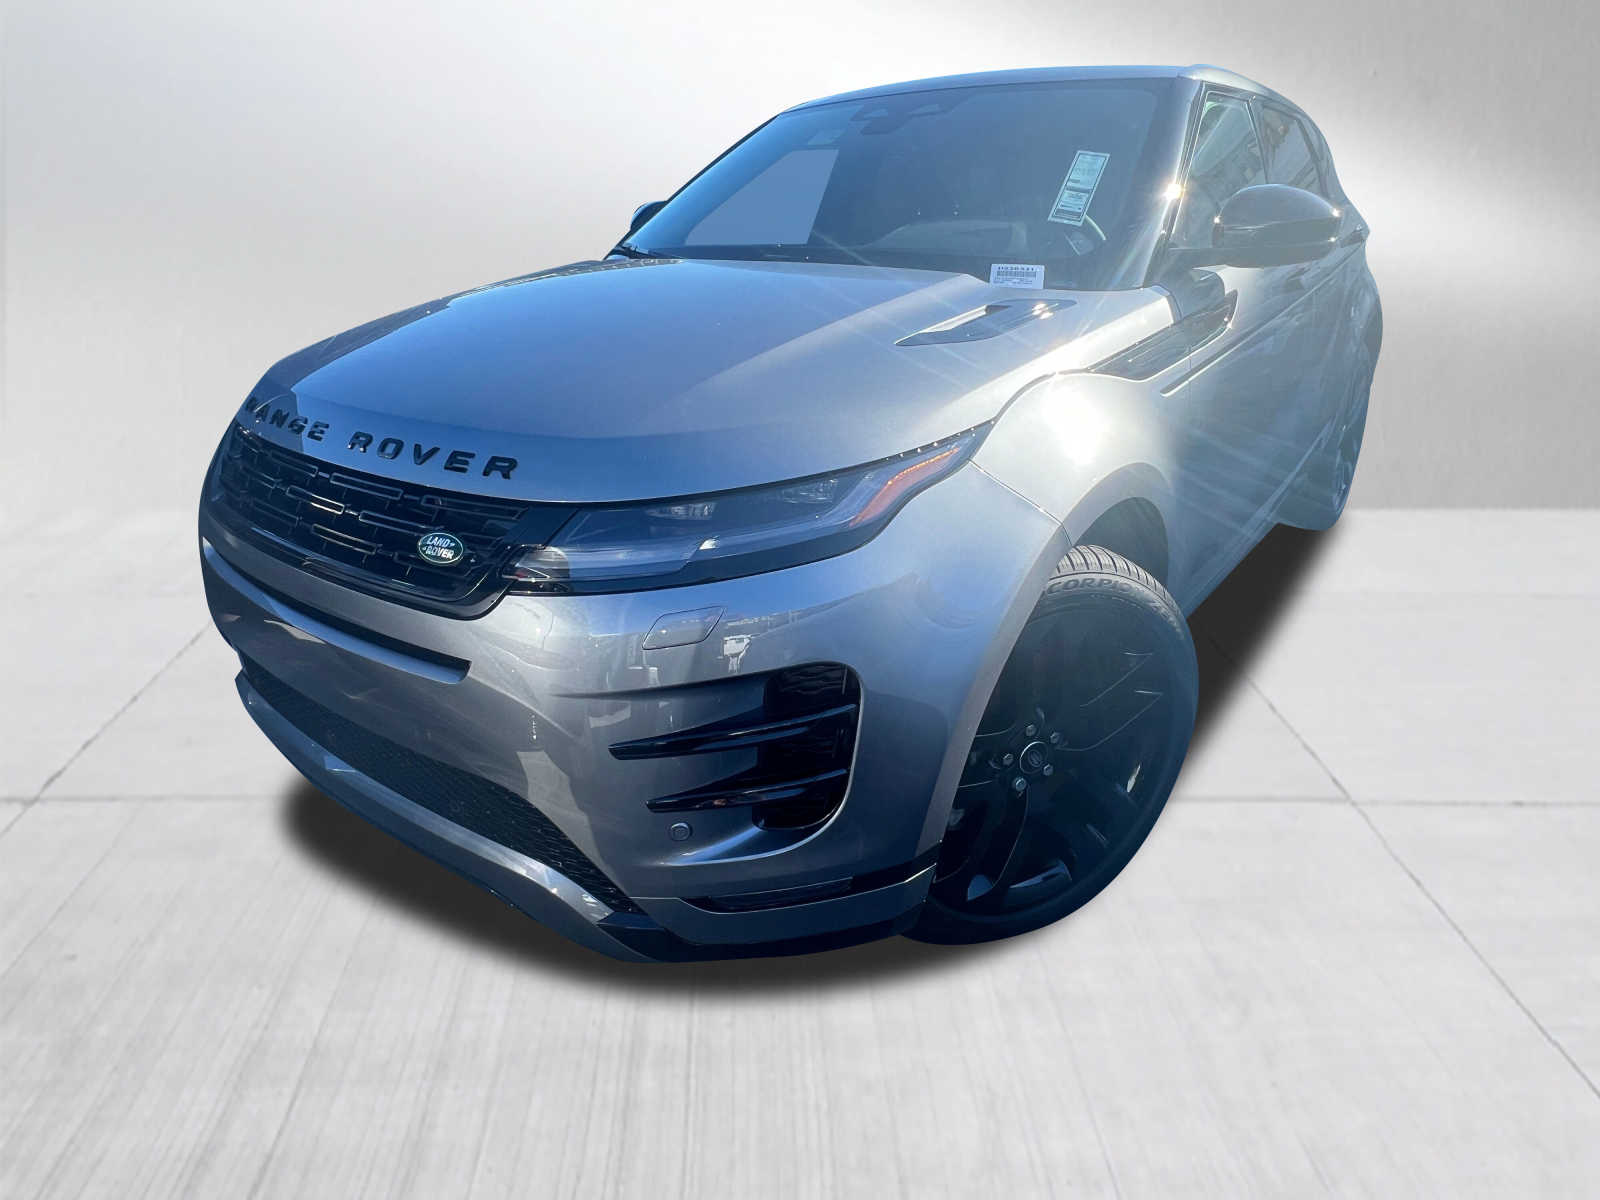 2021 Range Rover Evoque is more sophisticated and digitally